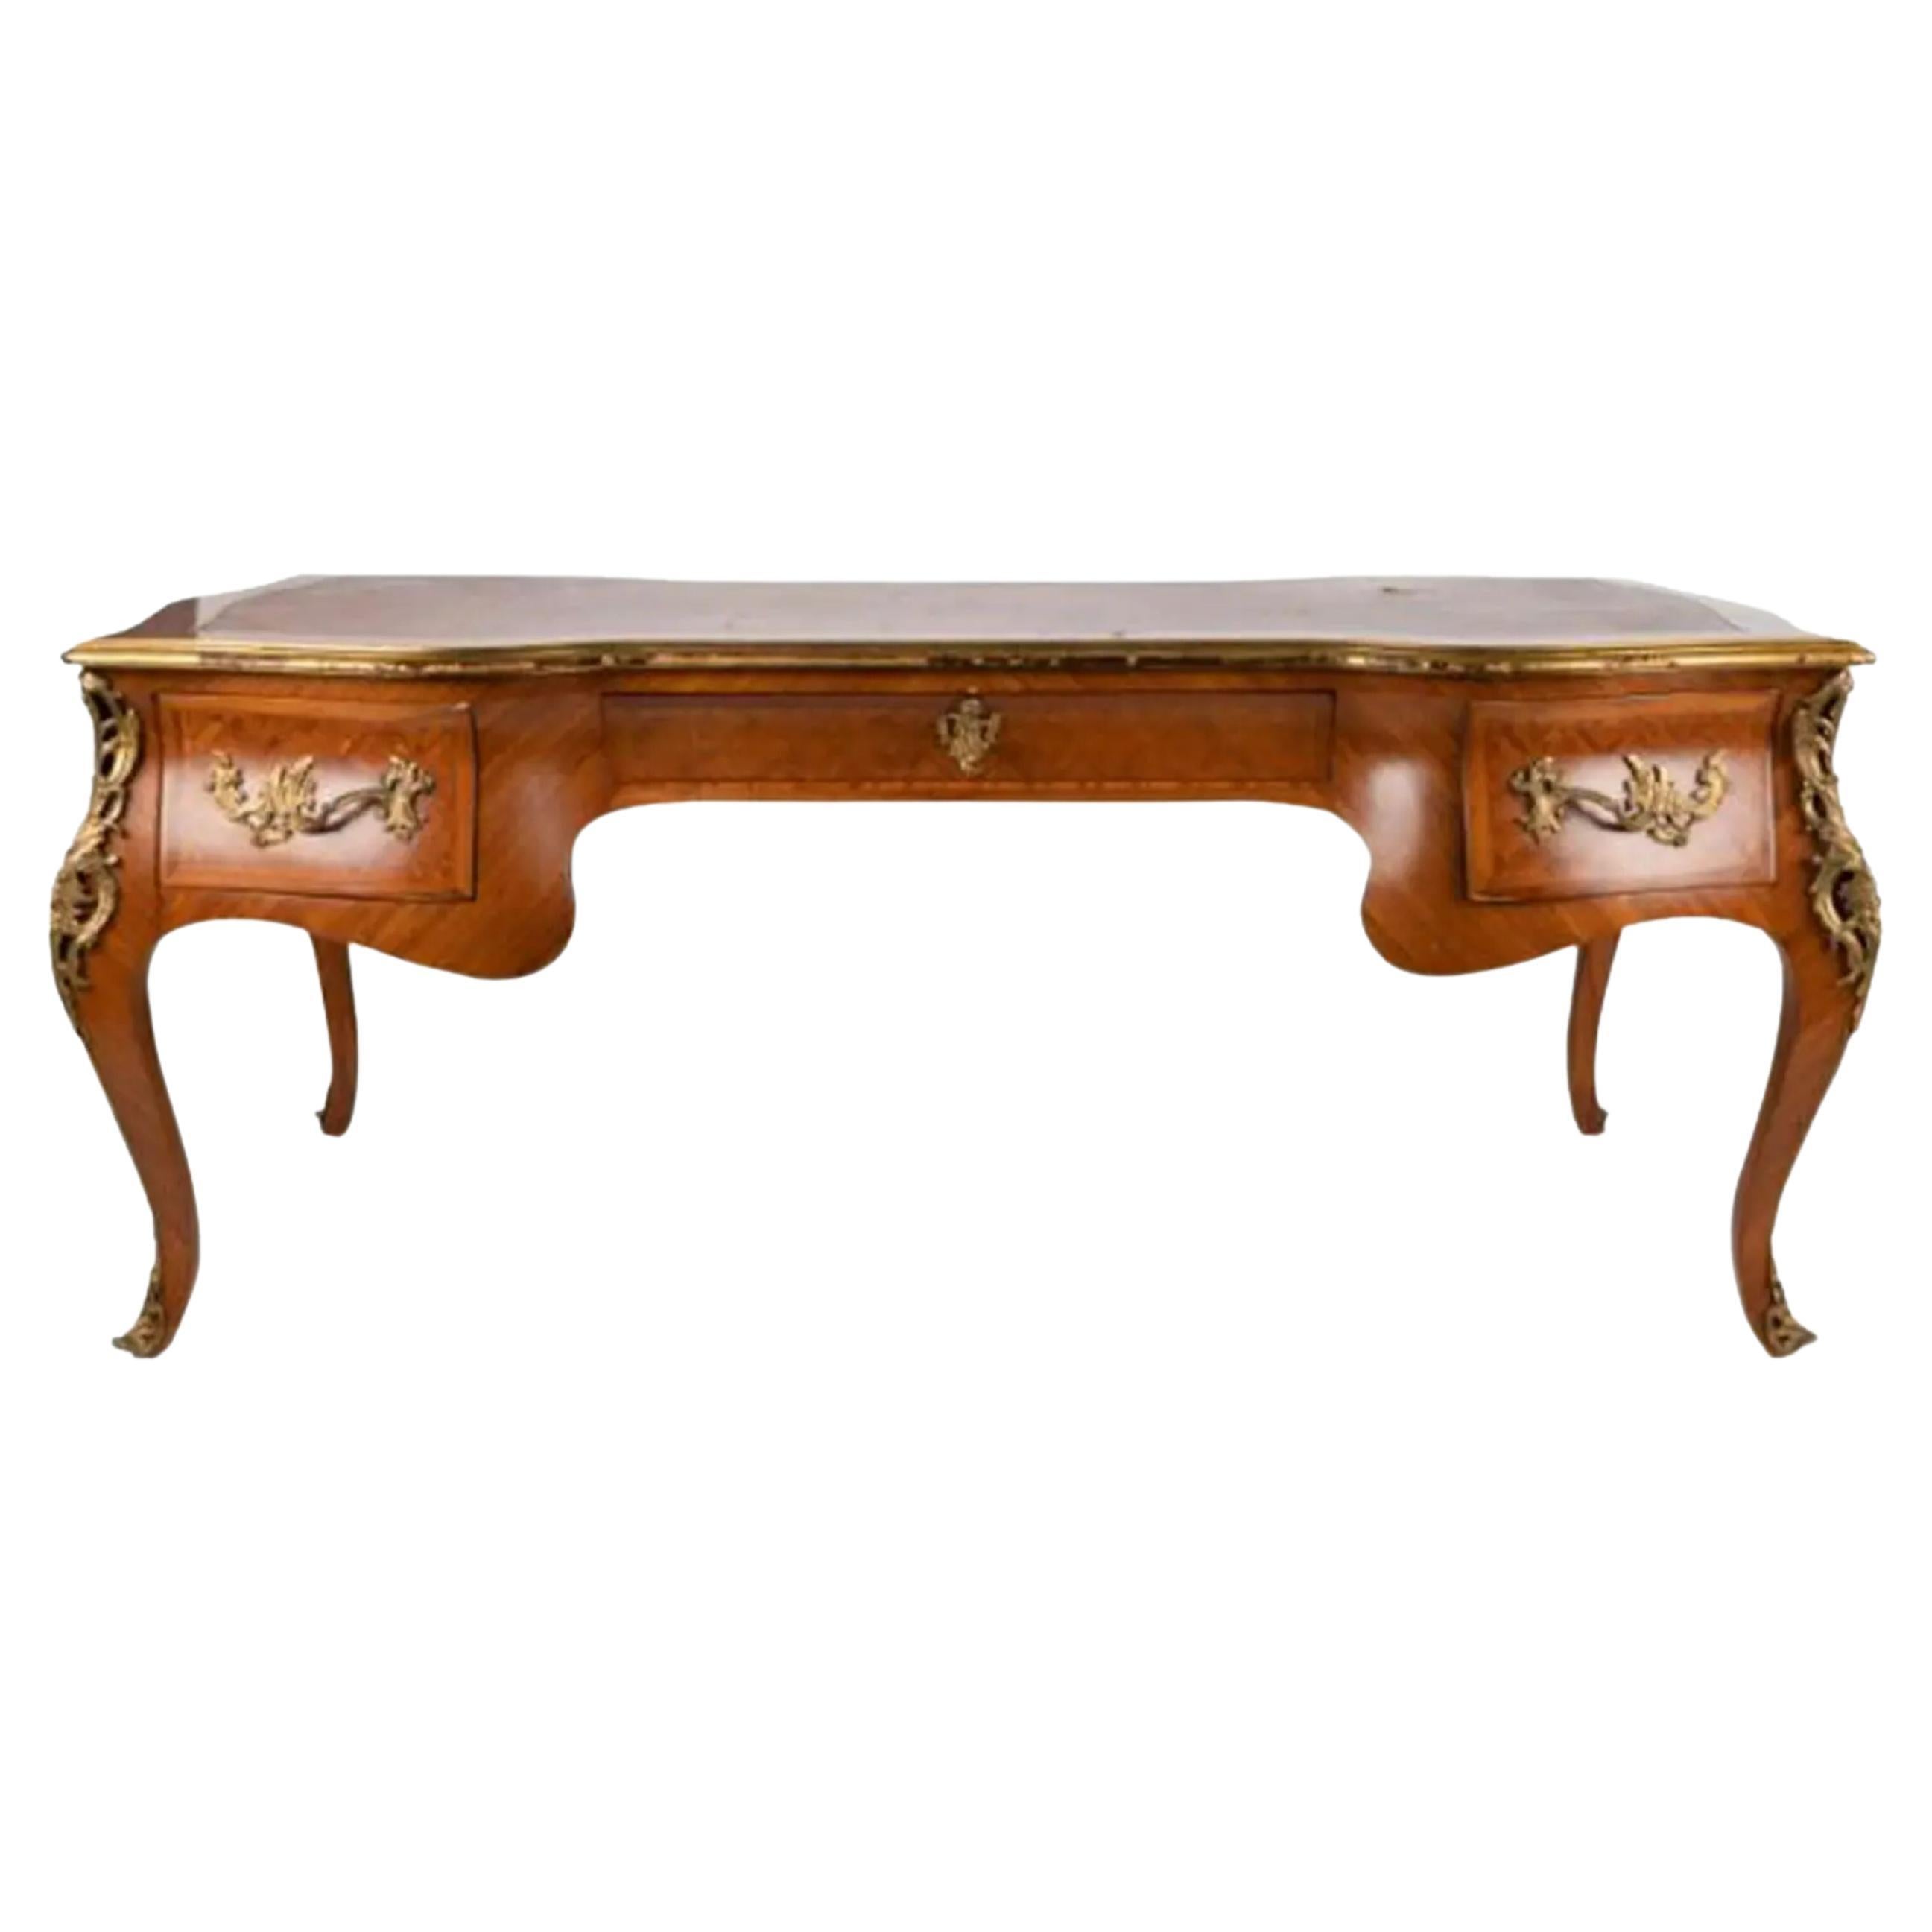 18th C Style Parquetry Inlaid & Giltwood Bureau Plat Writing Table Desk